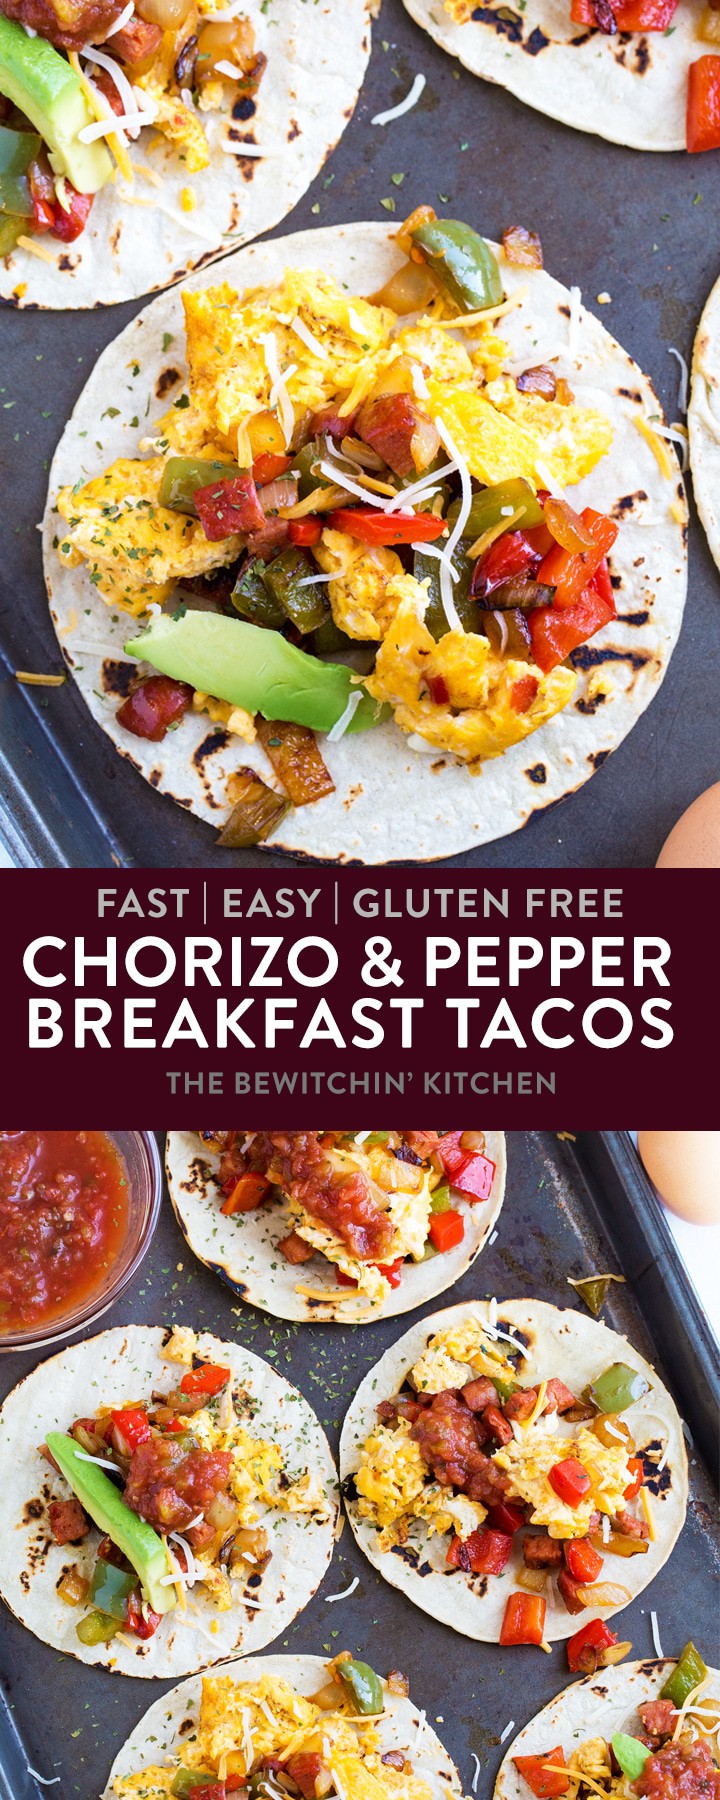 Breakfast Tacos | The Bewitchin' Kitchen